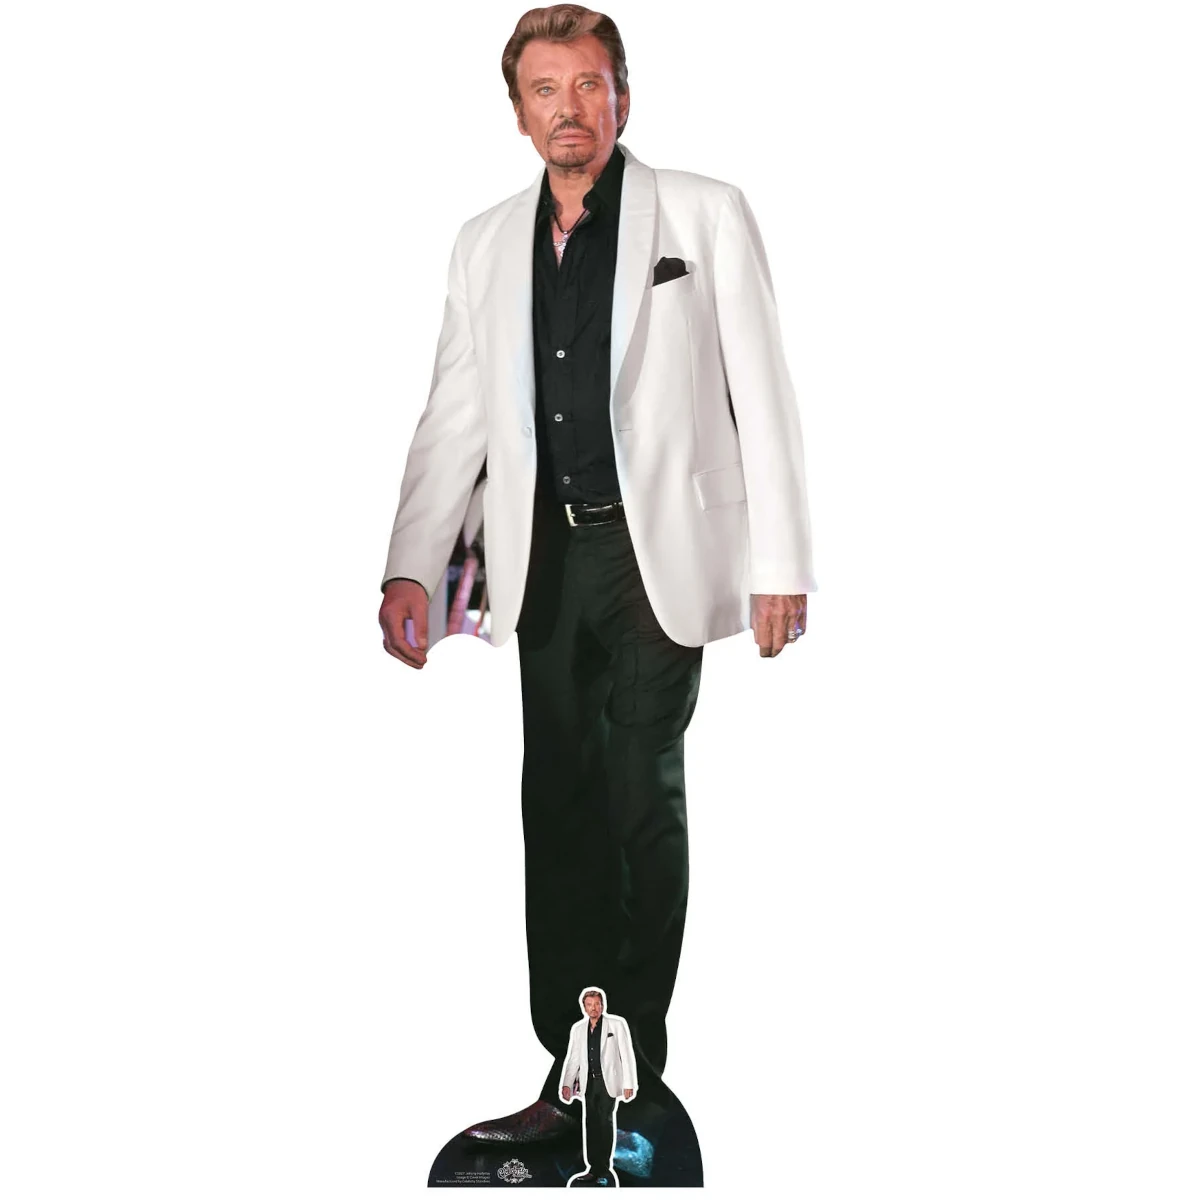 CS807 Johnny Hallyday (French Singer) Lifesize + Mini Cardboard Cutout Standee Front